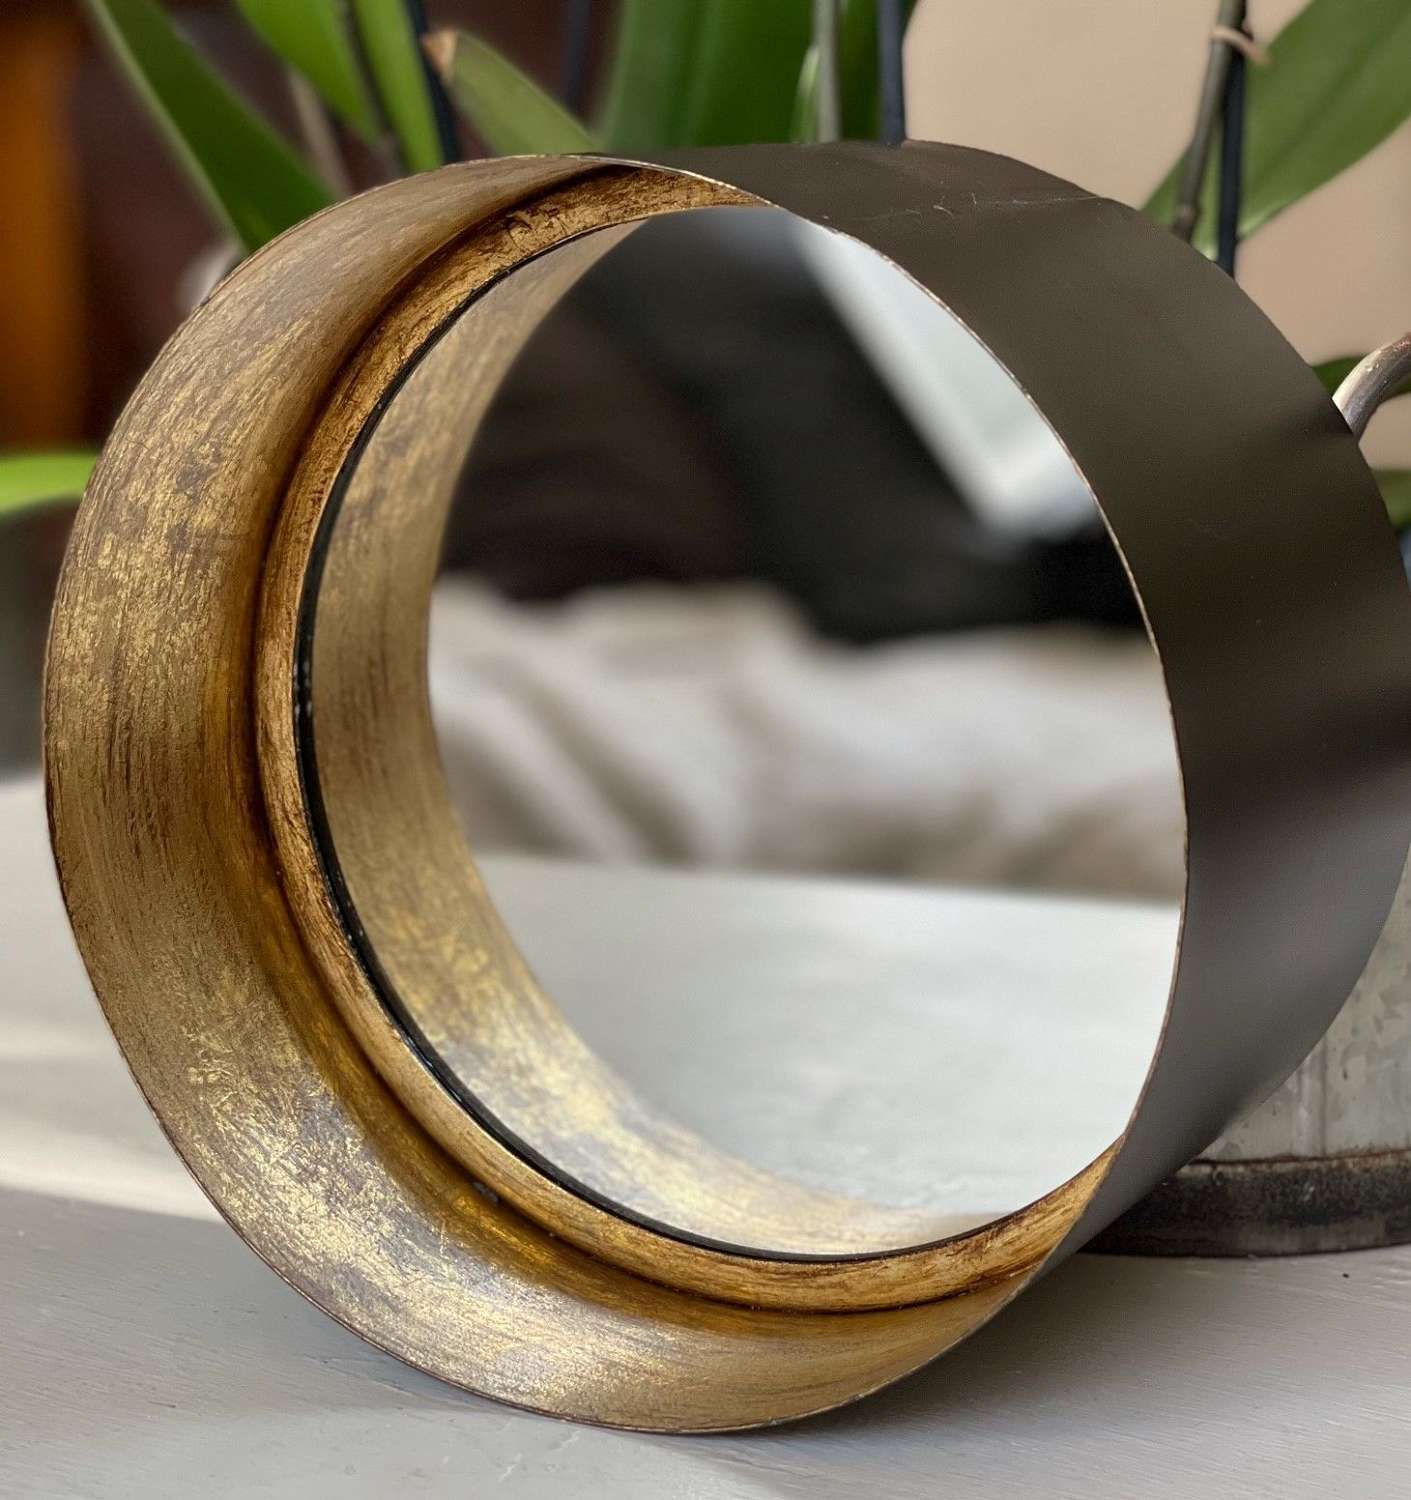 Antique style deep rim gold and black mirror.